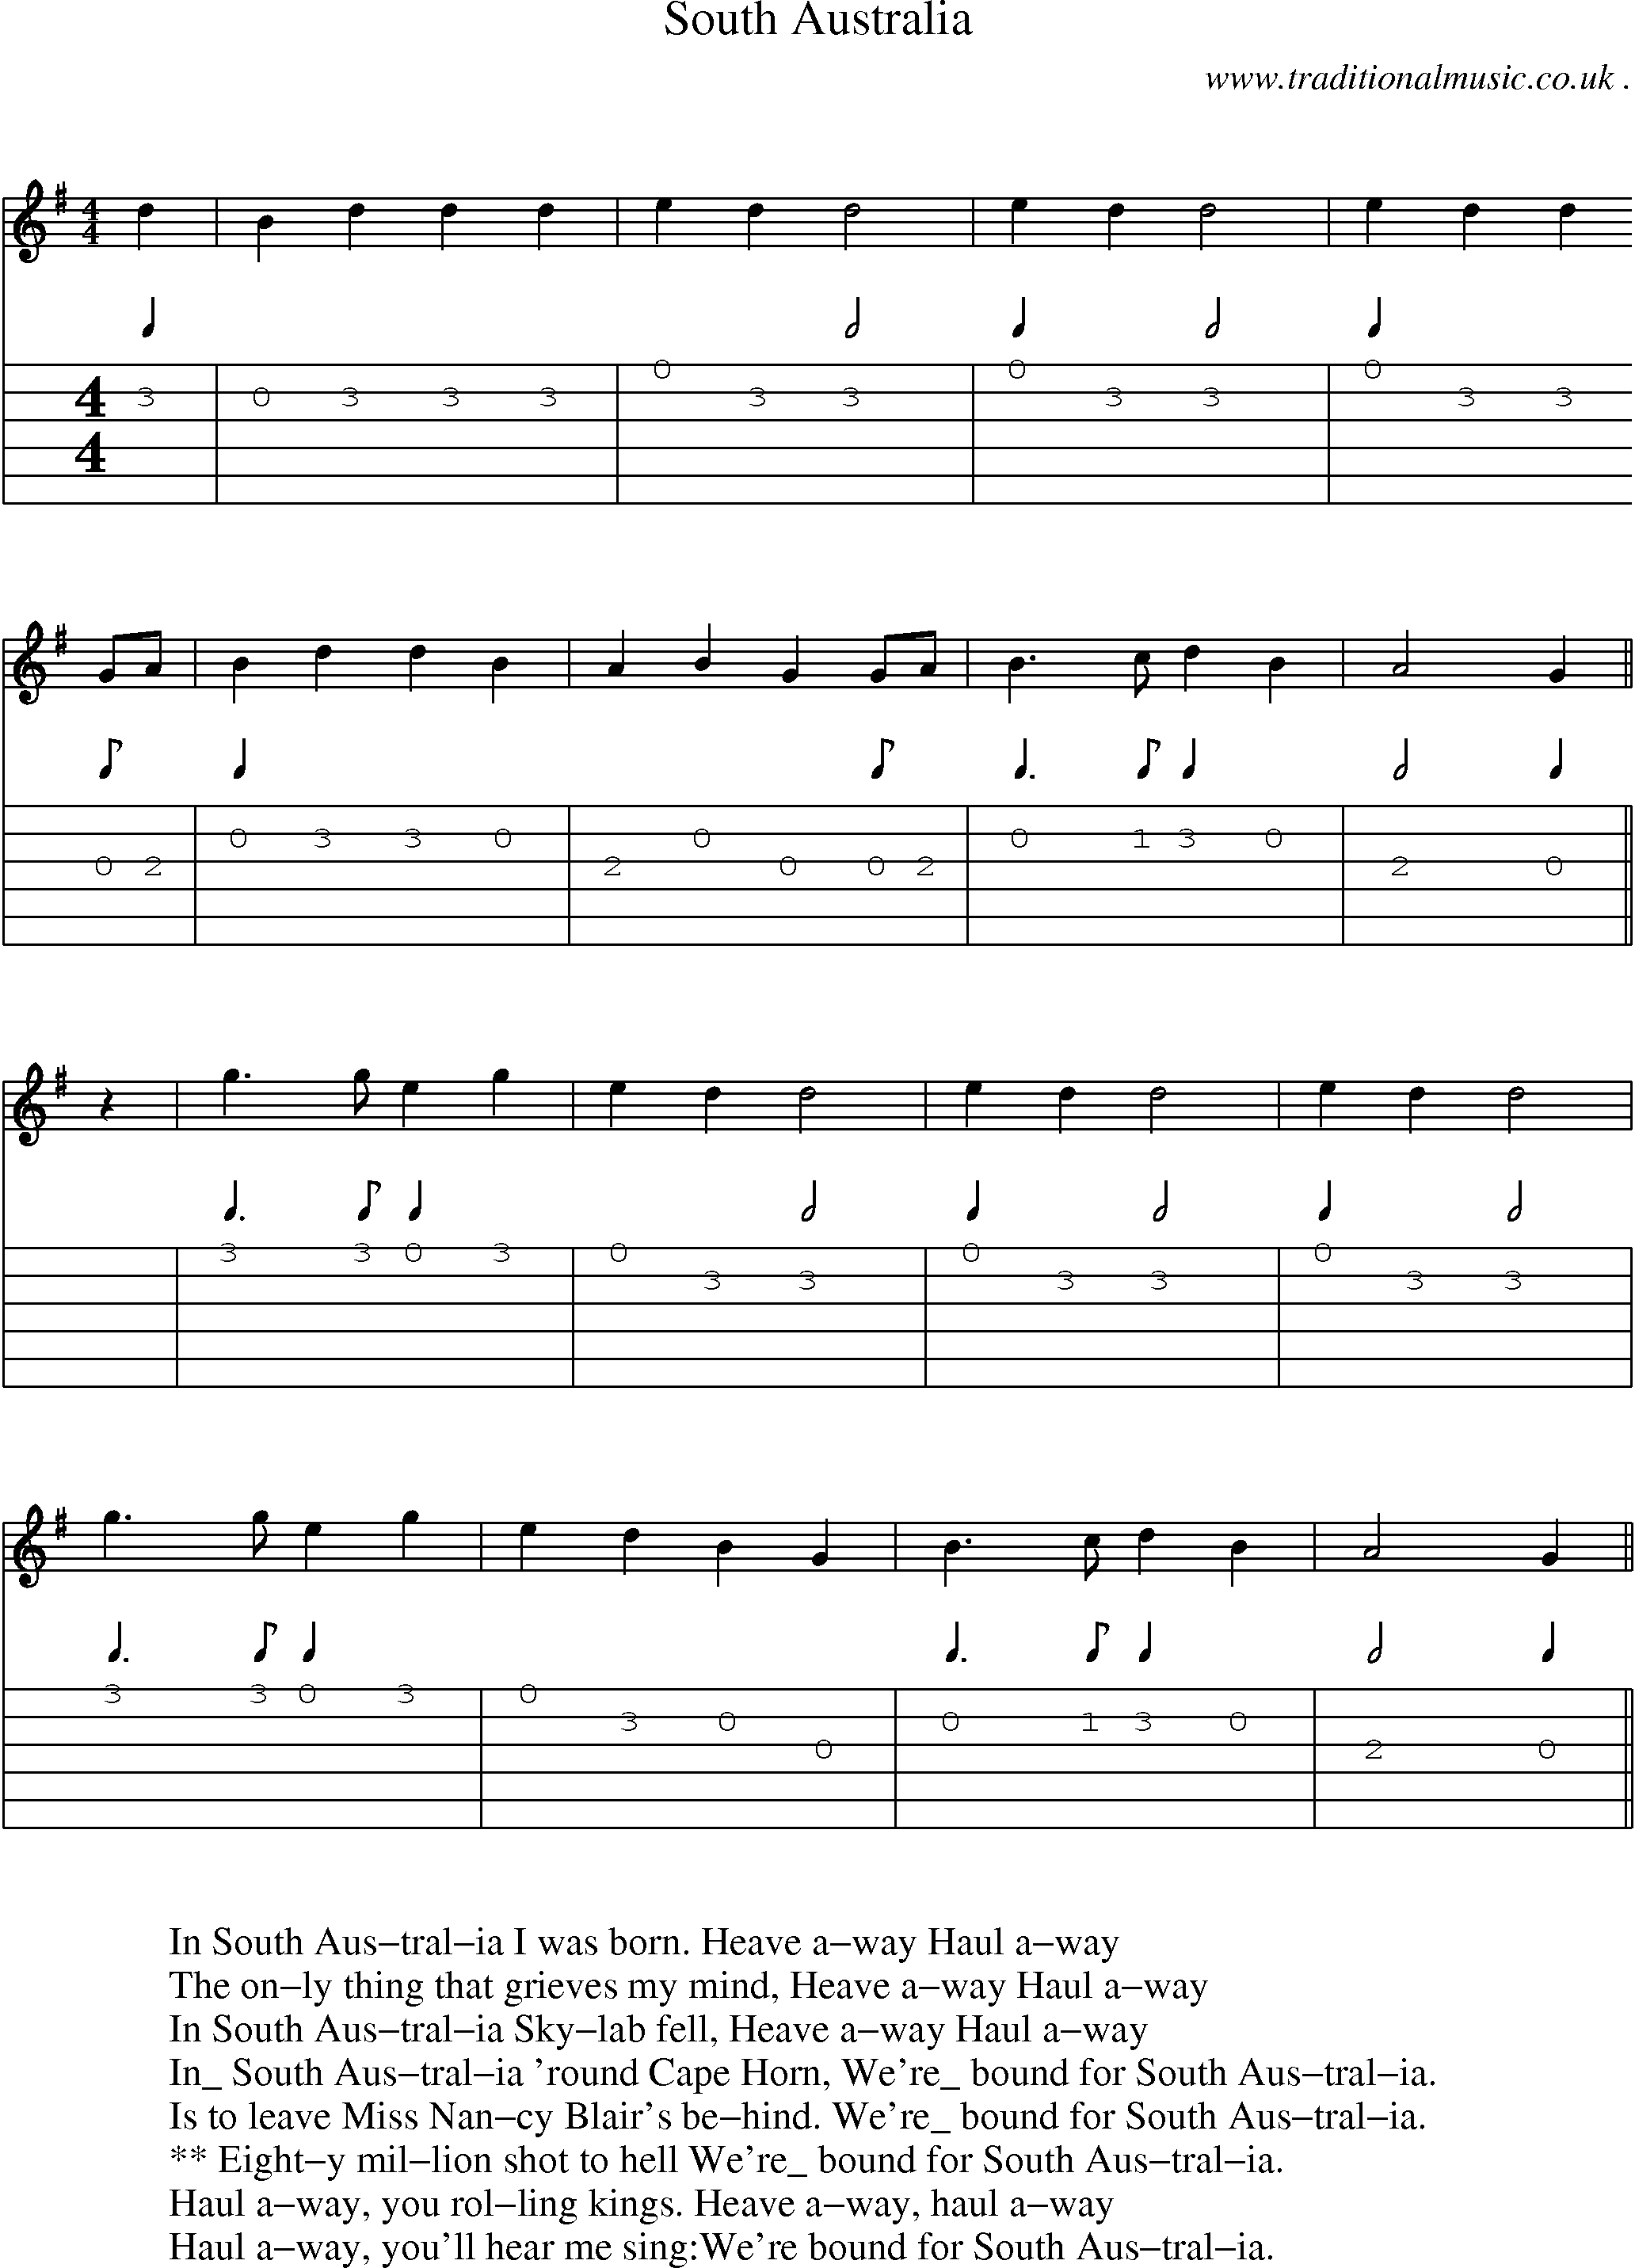 Sheet-Music and Guitar Tabs for South Australia